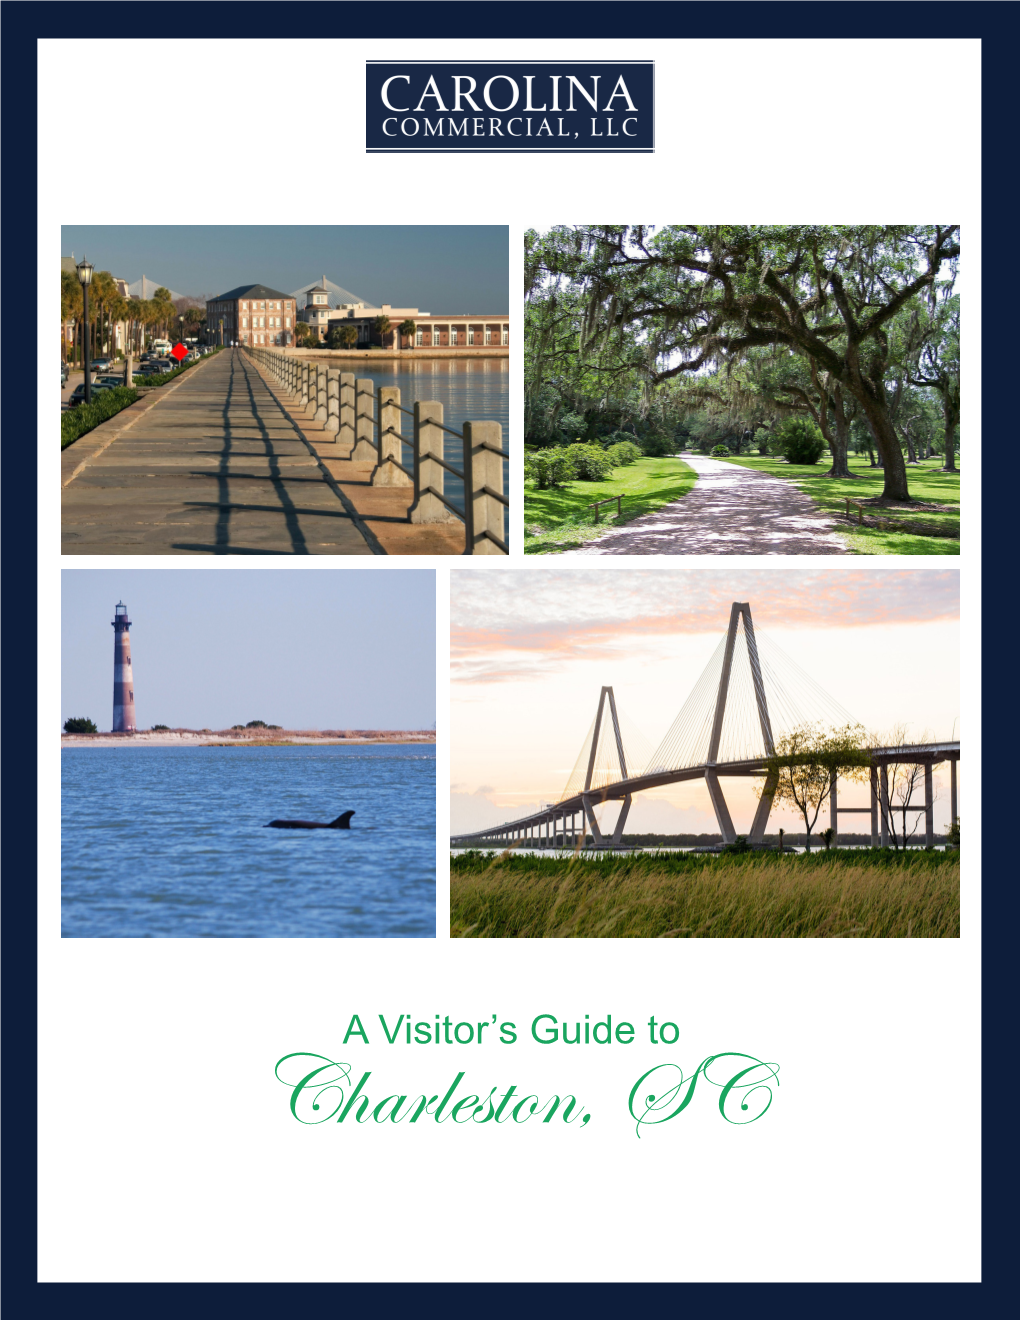 A Visitor's Guide to Charleston, SC